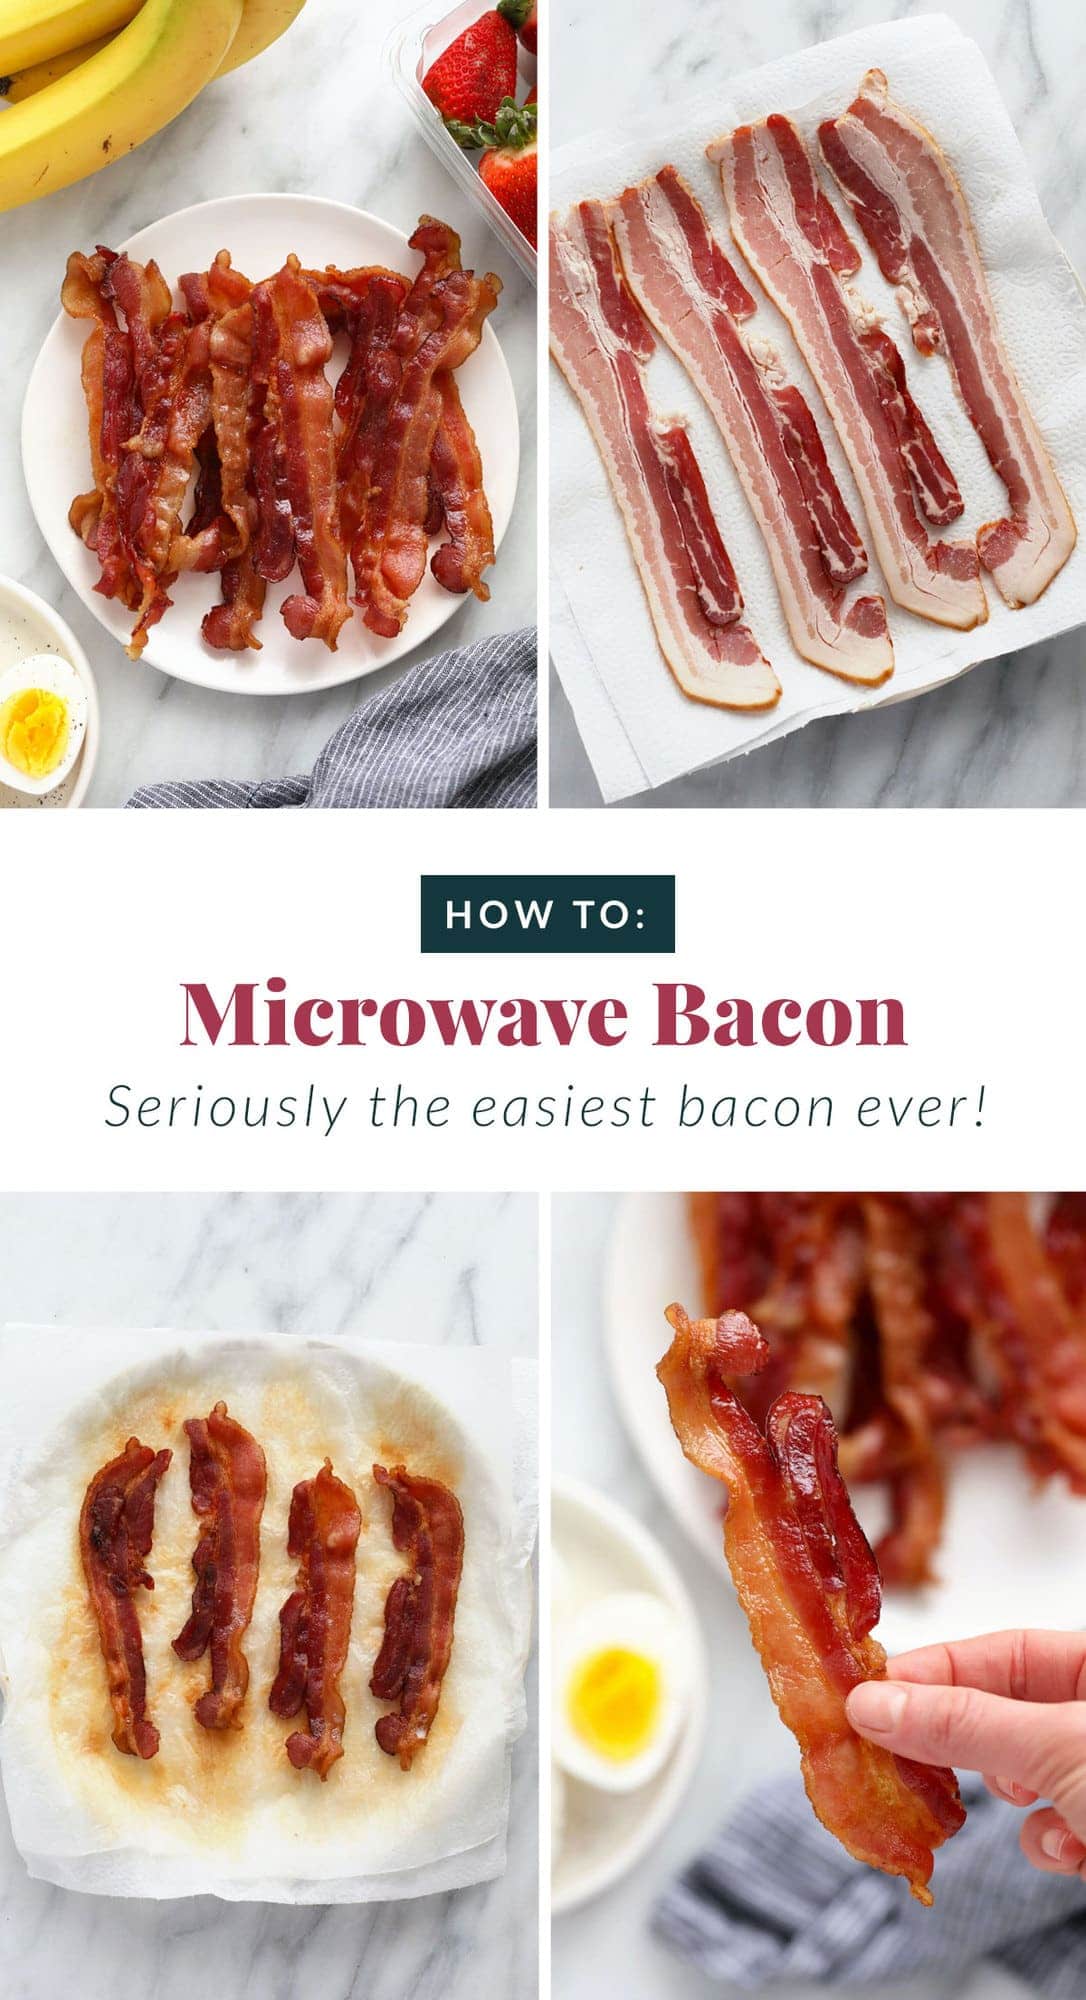 Different steps to cook bacon in the microwave.